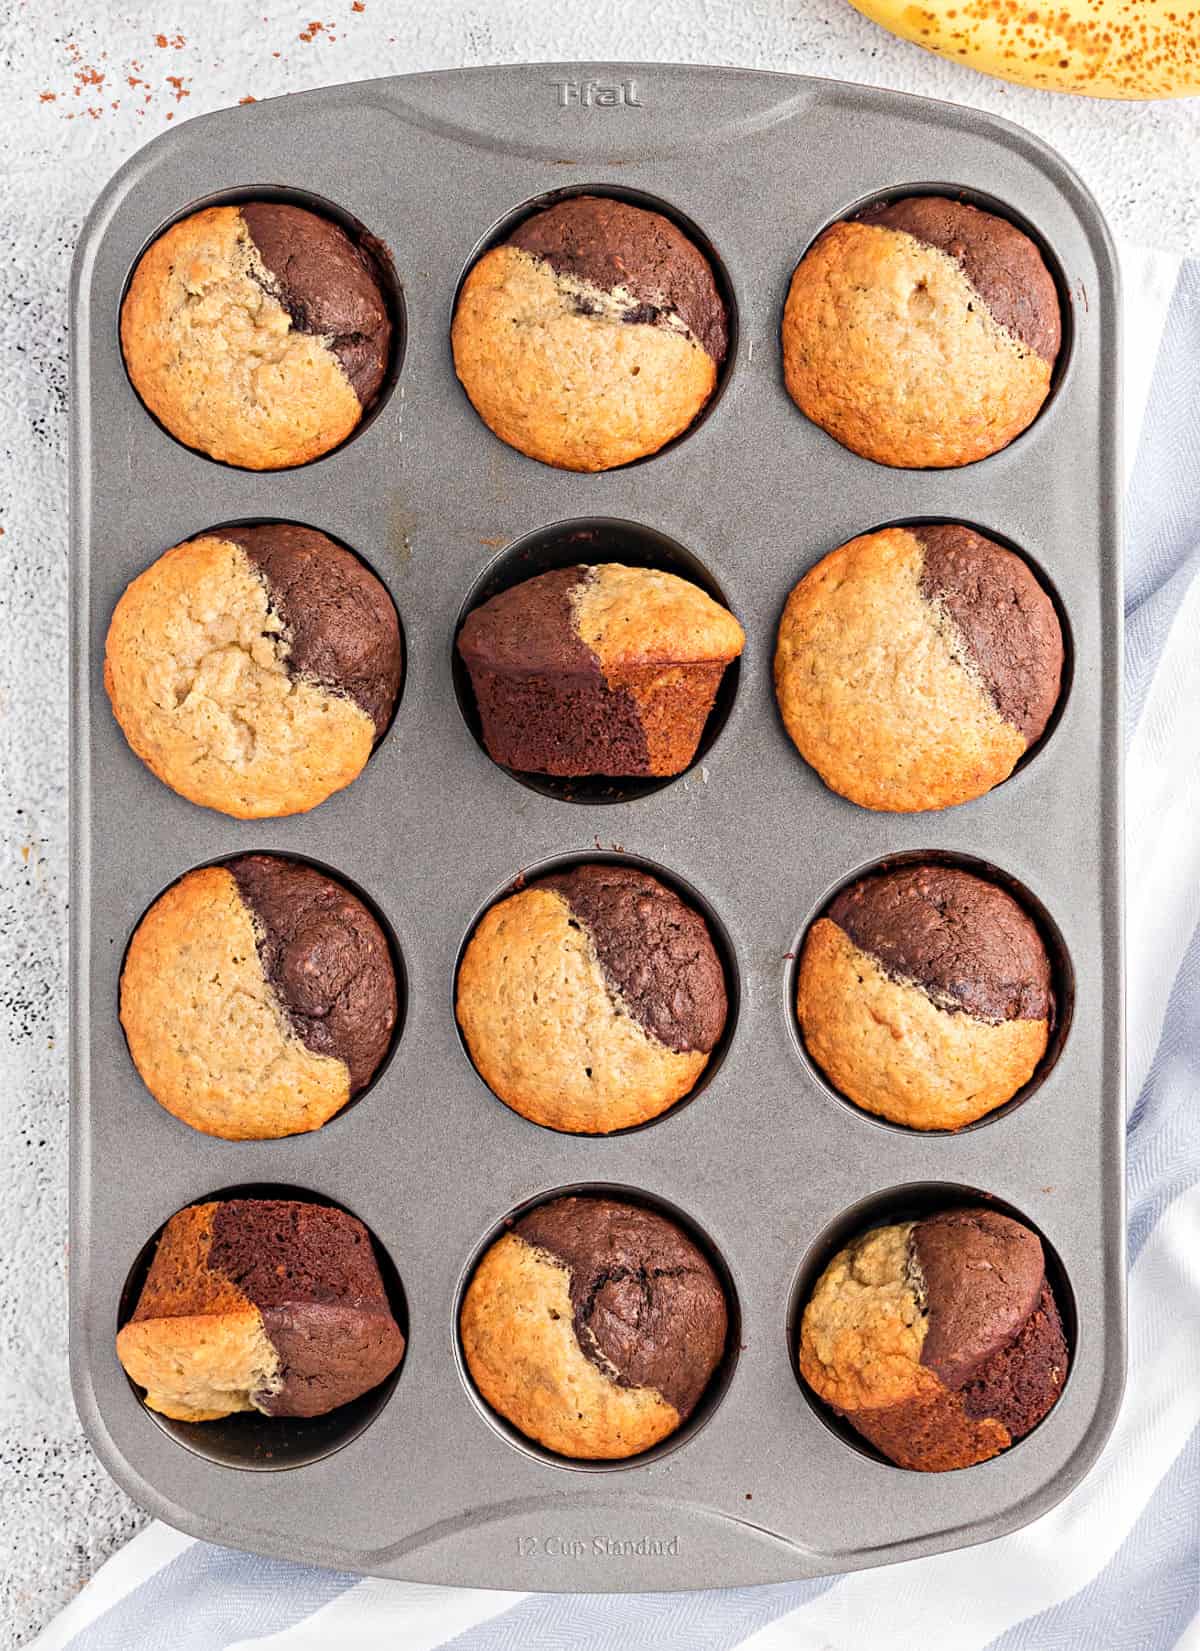 Banana muffins with chocolate in a metal cupcake tin.